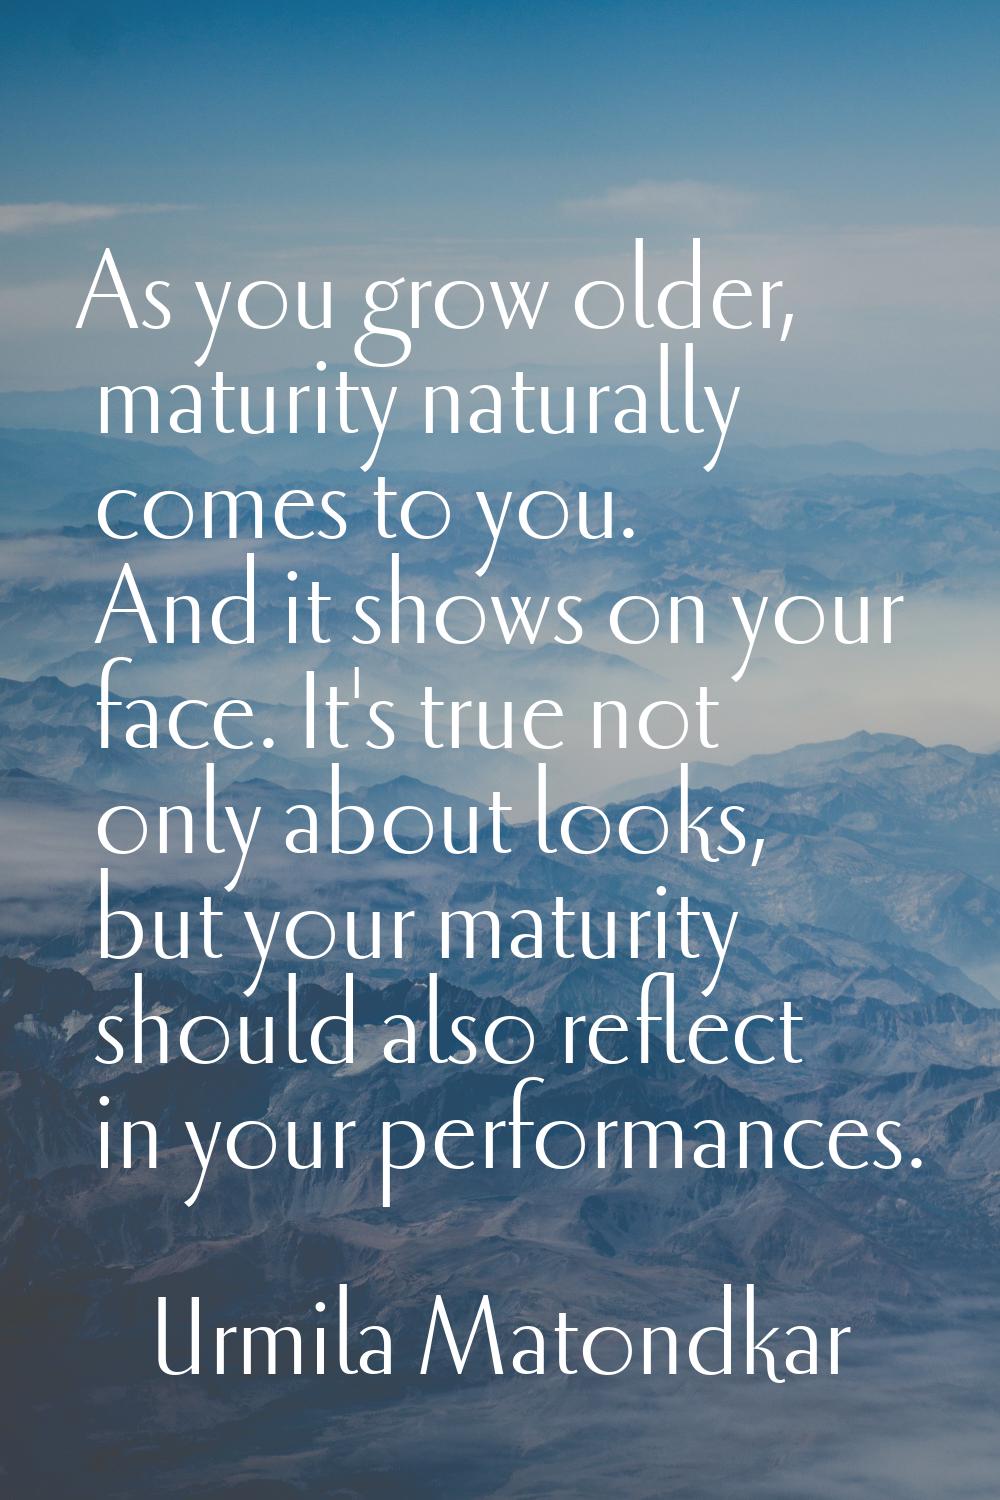 As you grow older, maturity naturally comes to you. And it shows on your face. It's true not only a